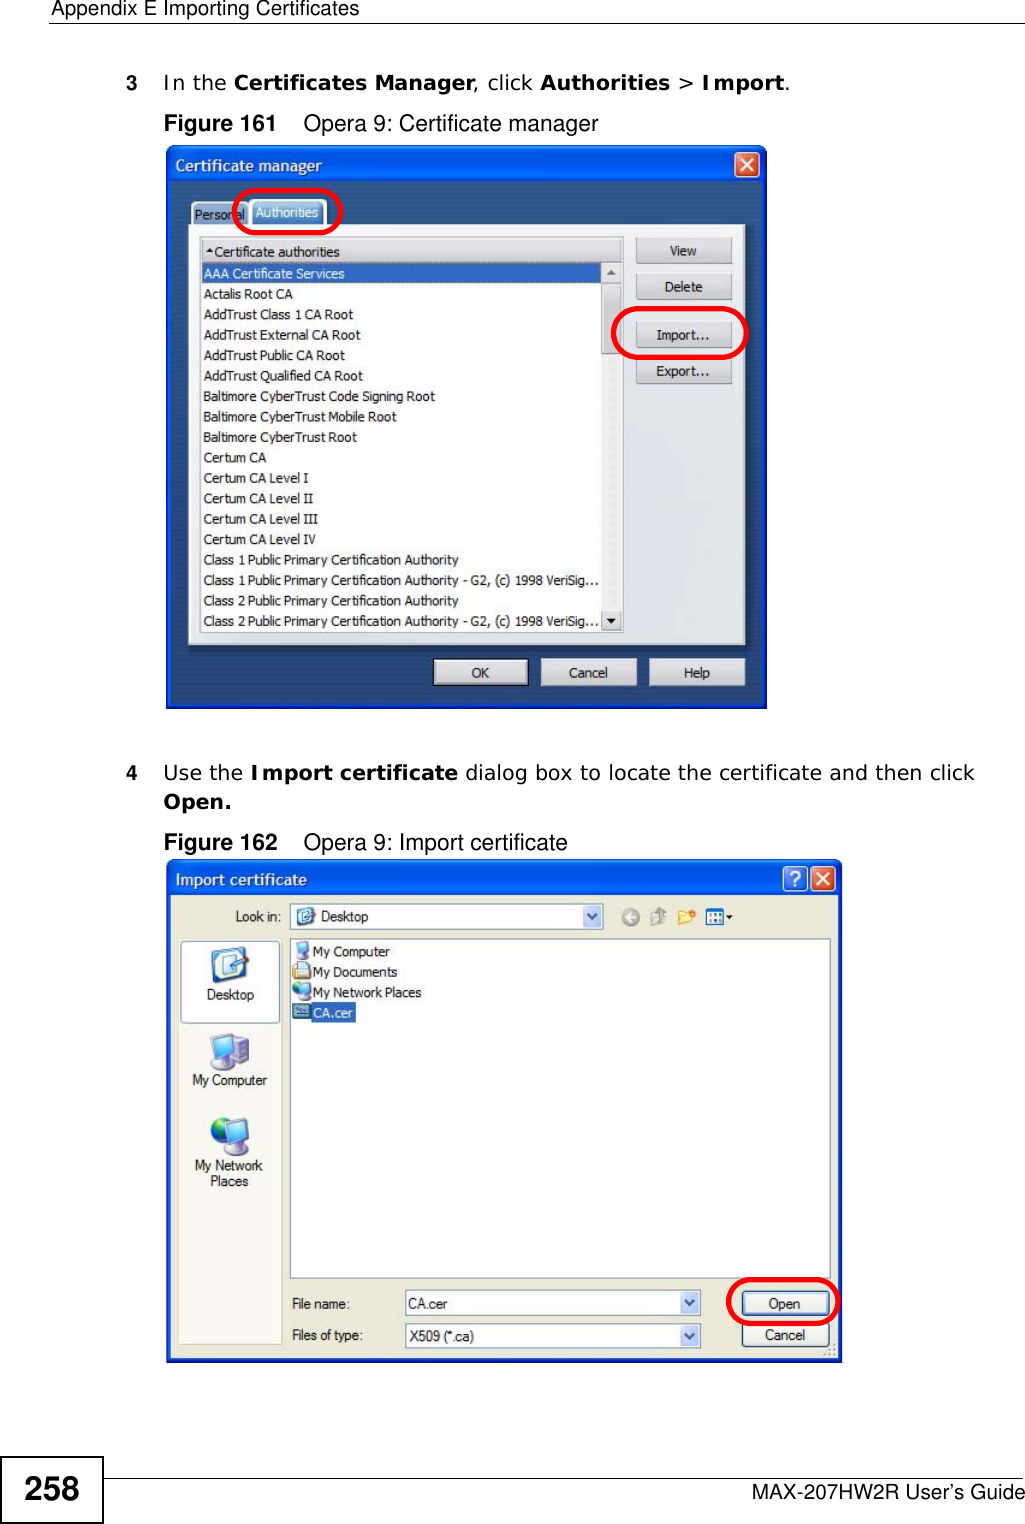 Appendix E Importing CertificatesMAX-207HW2R User’s Guide2583In the Certificates Manager, click Authorities &gt; Import.Figure 161    Opera 9: Certificate manager4Use the Import certificate dialog box to locate the certificate and then click Open.Figure 162    Opera 9: Import certificate